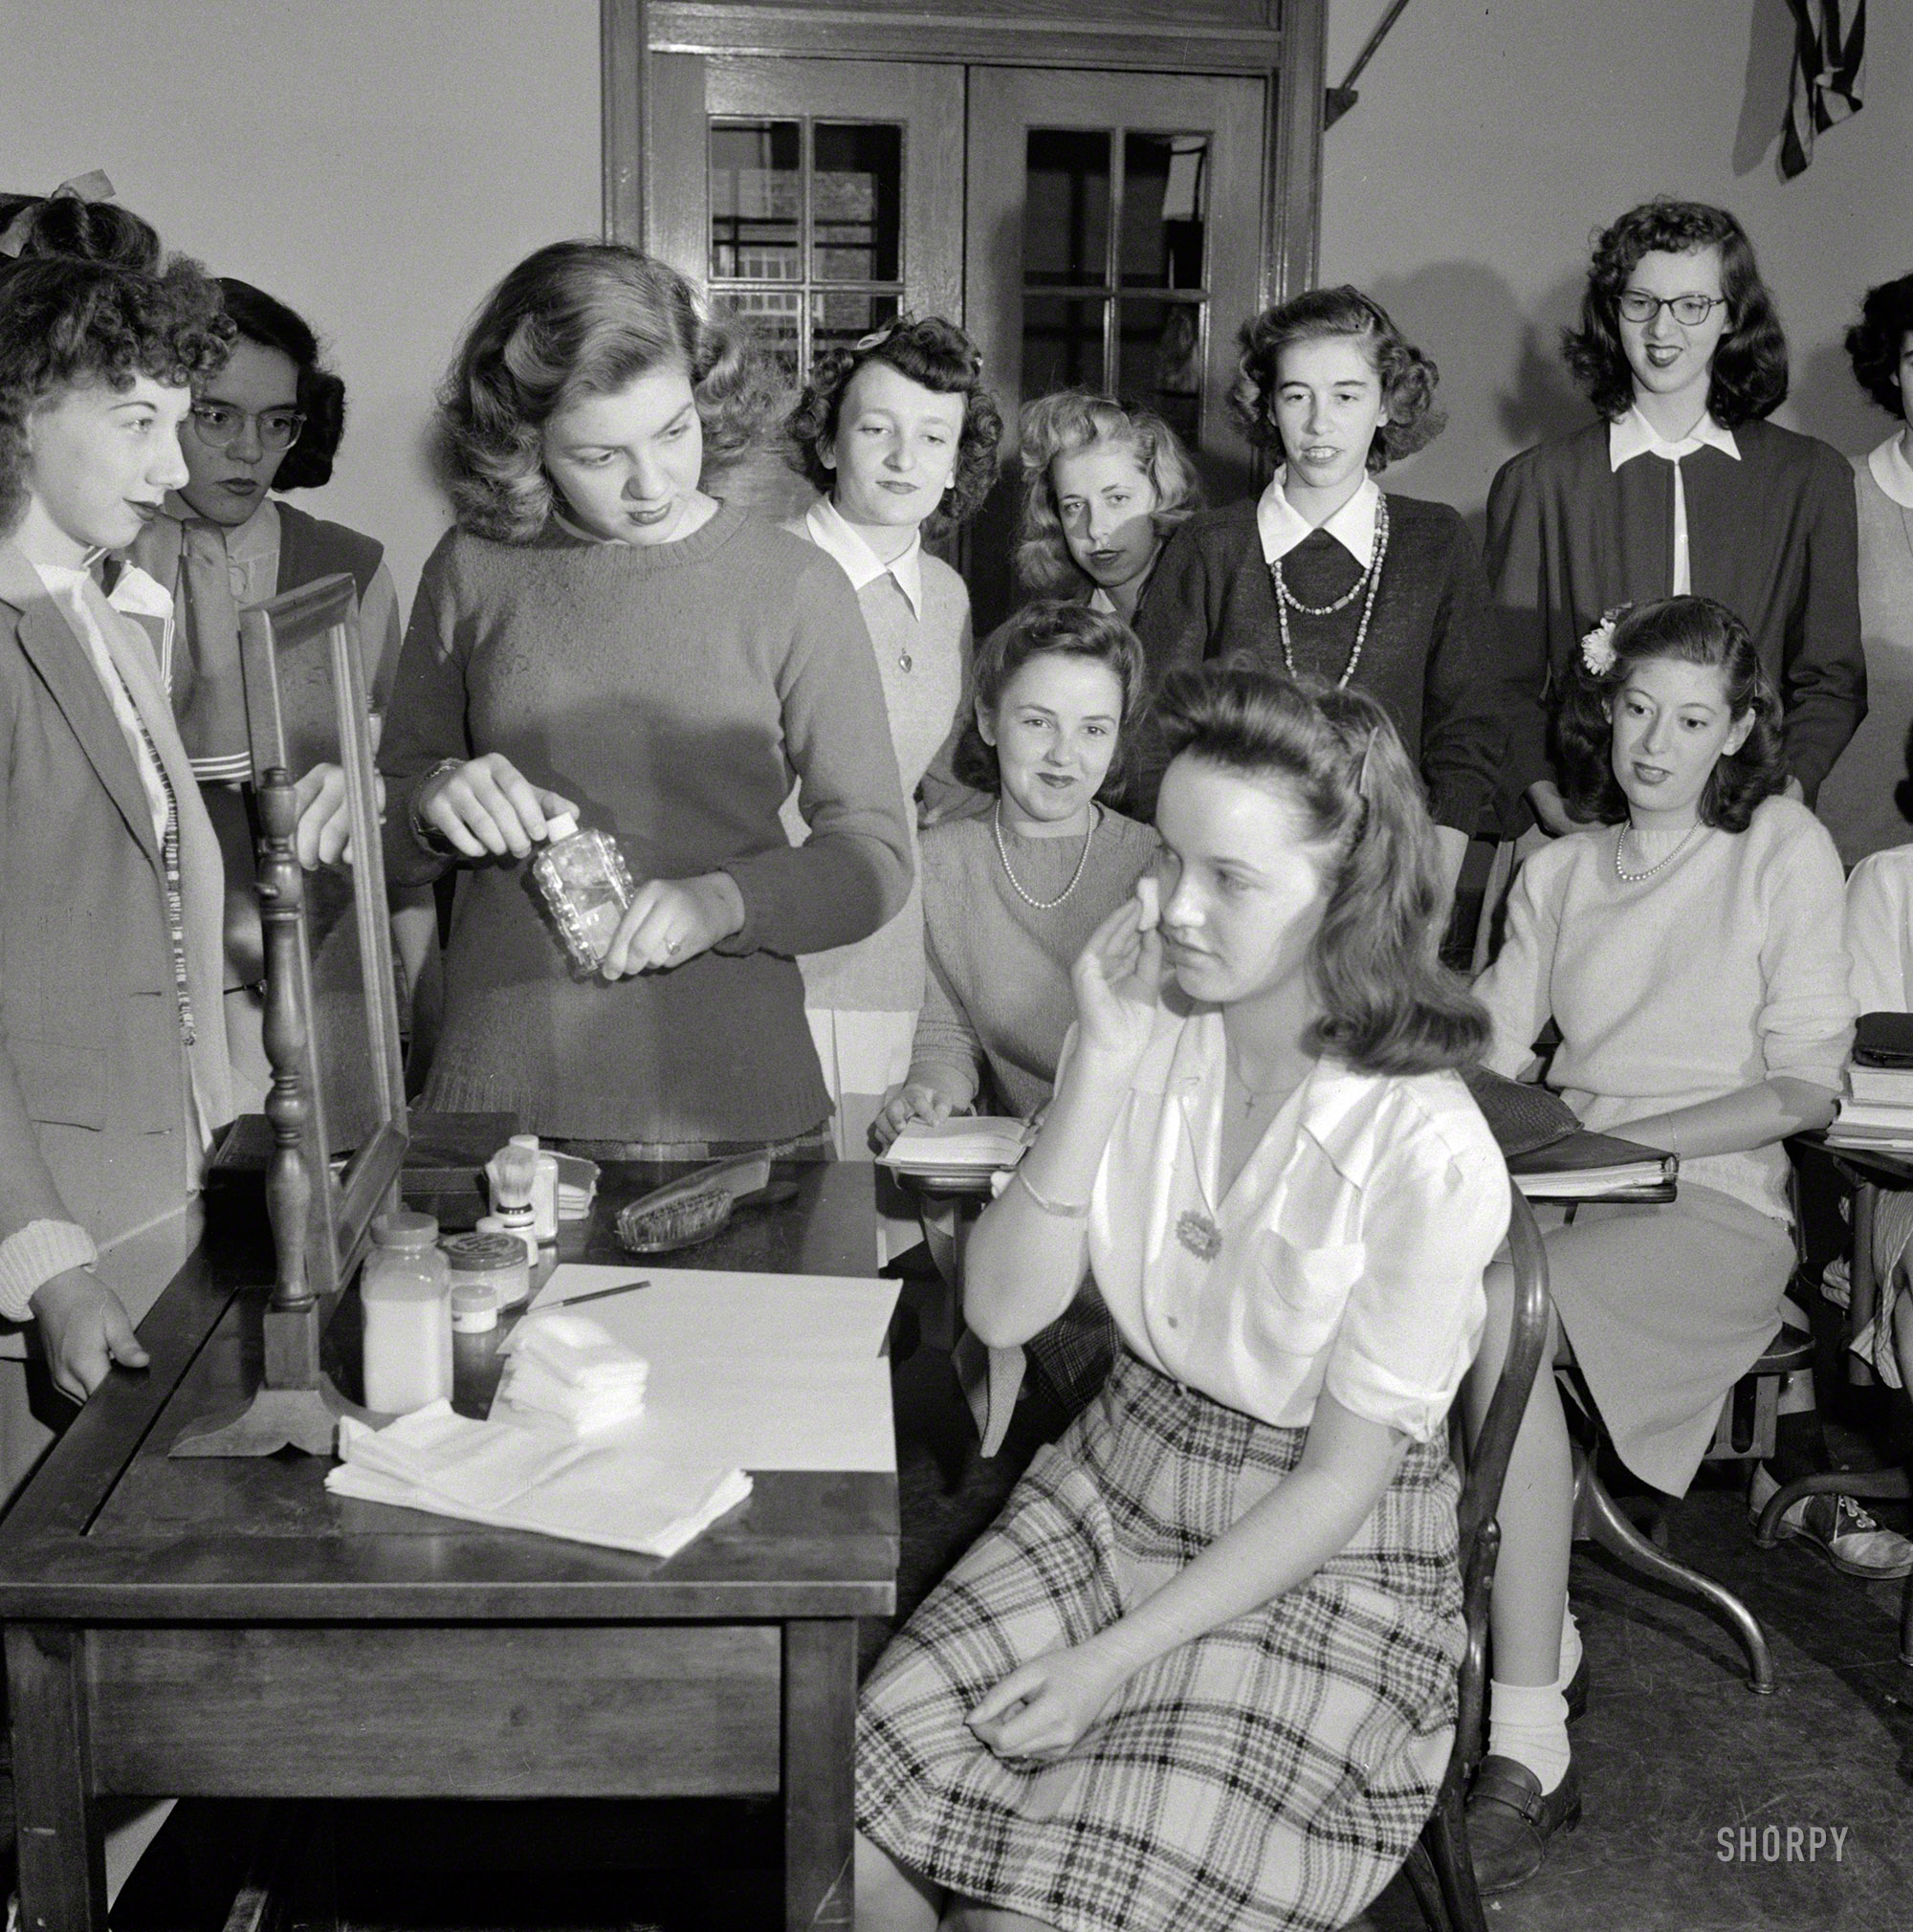 October 1943. Washington, D.C. "Demonstration of the correct procedure in applying street makeup. Home management class at Woodrow Wilson High School." Photo by Esther Bubley, Office of War Information. View full size.